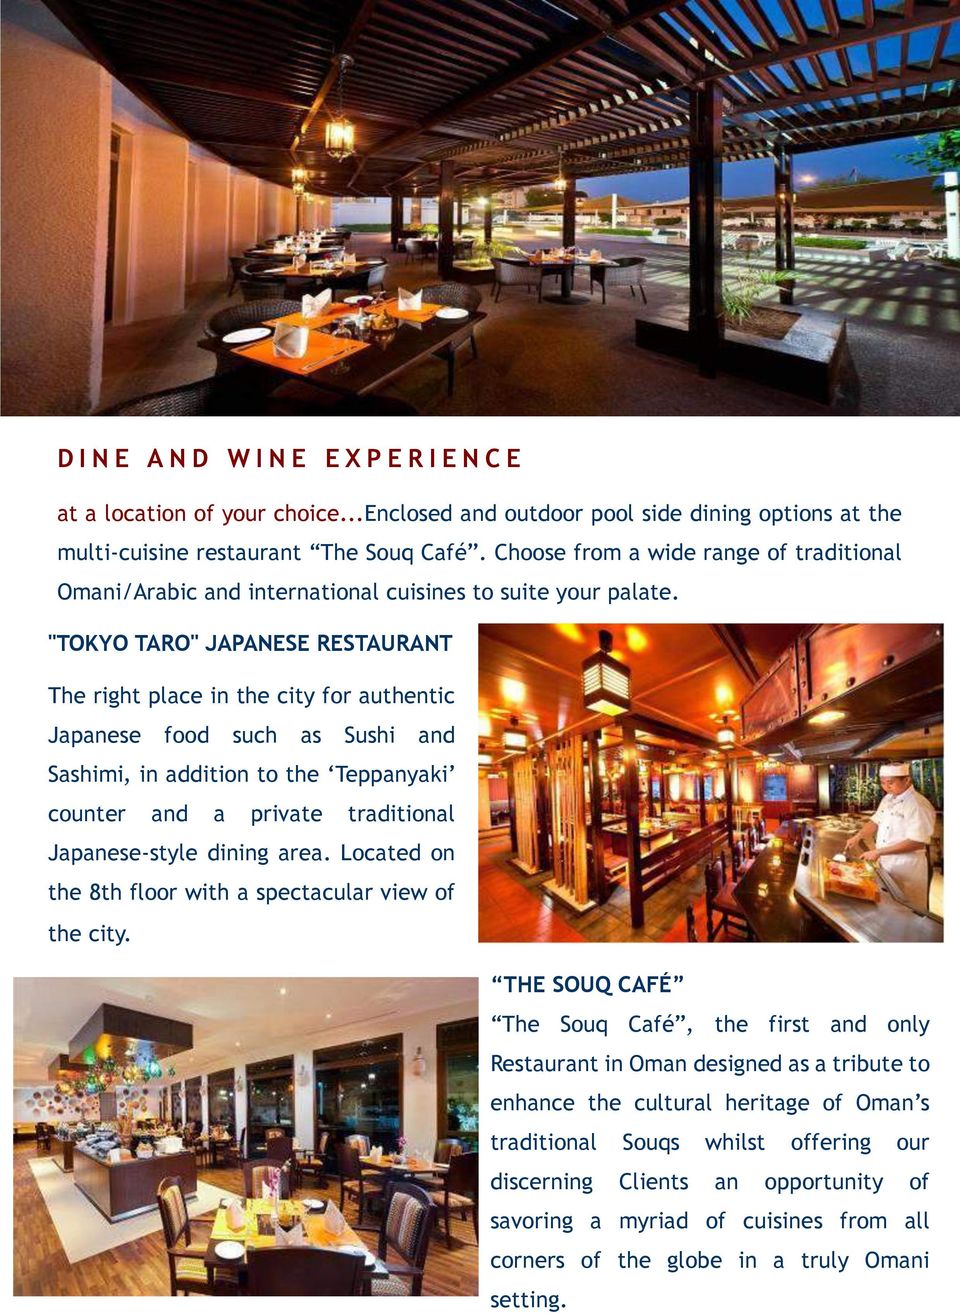 "TOKYO TARO" JAPANESE RESTAURANT The right place in the city for authentic Japanese food such as Sushi and Sashimi, in addition to the Teppanyaki counter and a private traditional Japanese-style